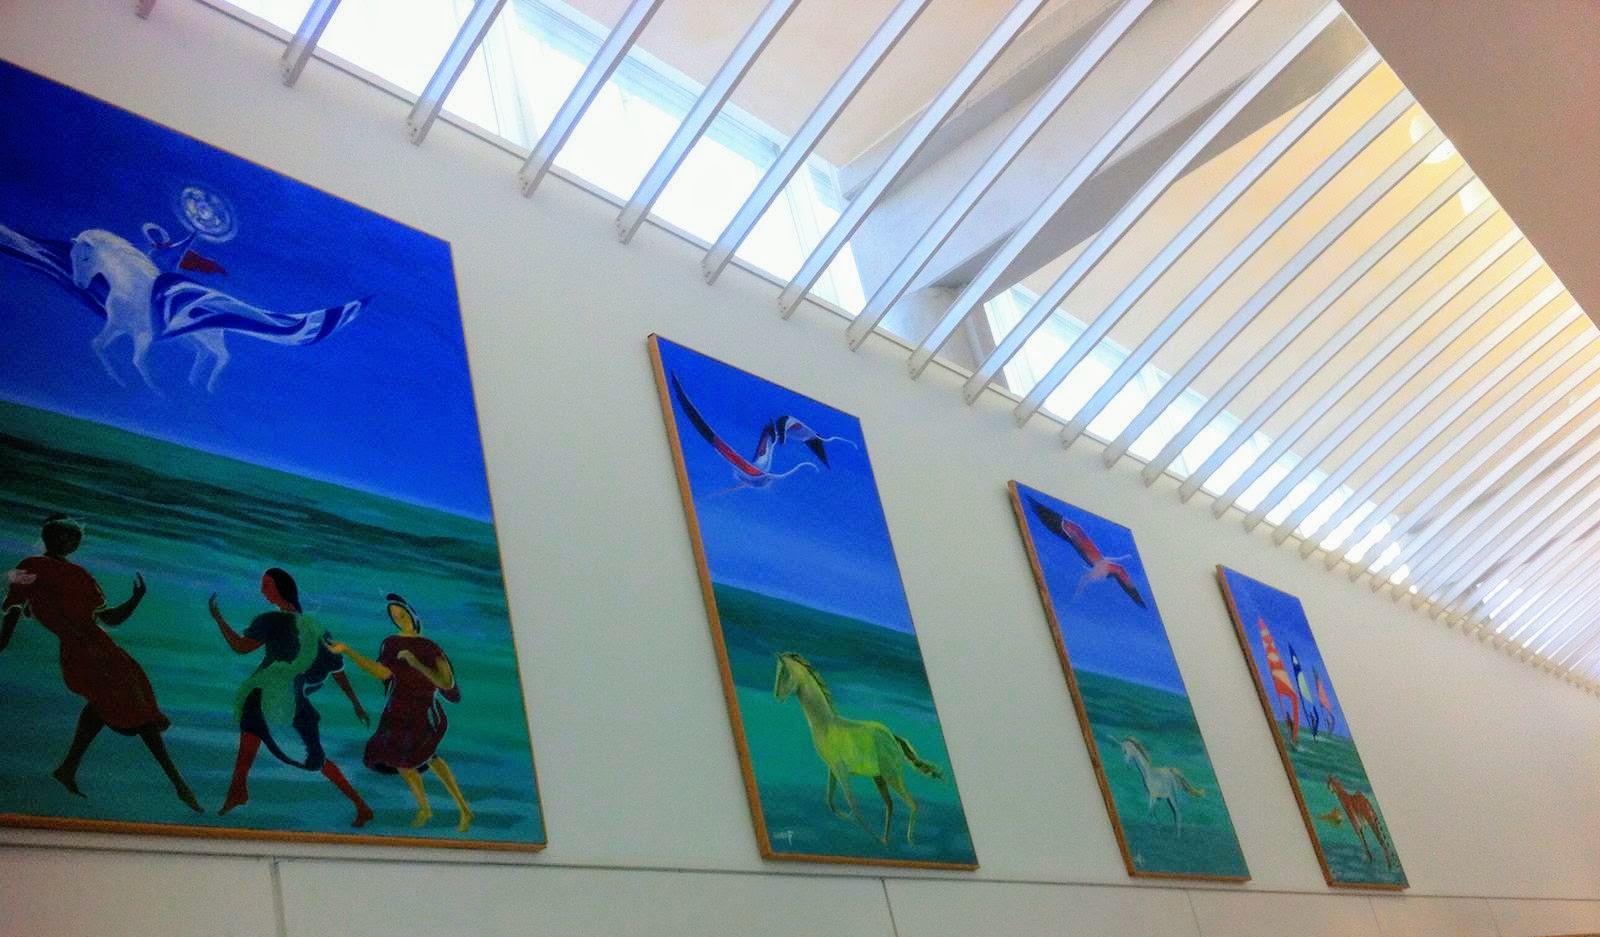 Enrrico Garff's Artwork measures all in all 150 x 700 cm. The masterpiece formed by 5 oil on canvas artwork paintings is located in the city center of Helsinki, on display since year 2003 in the Kamppi service center.